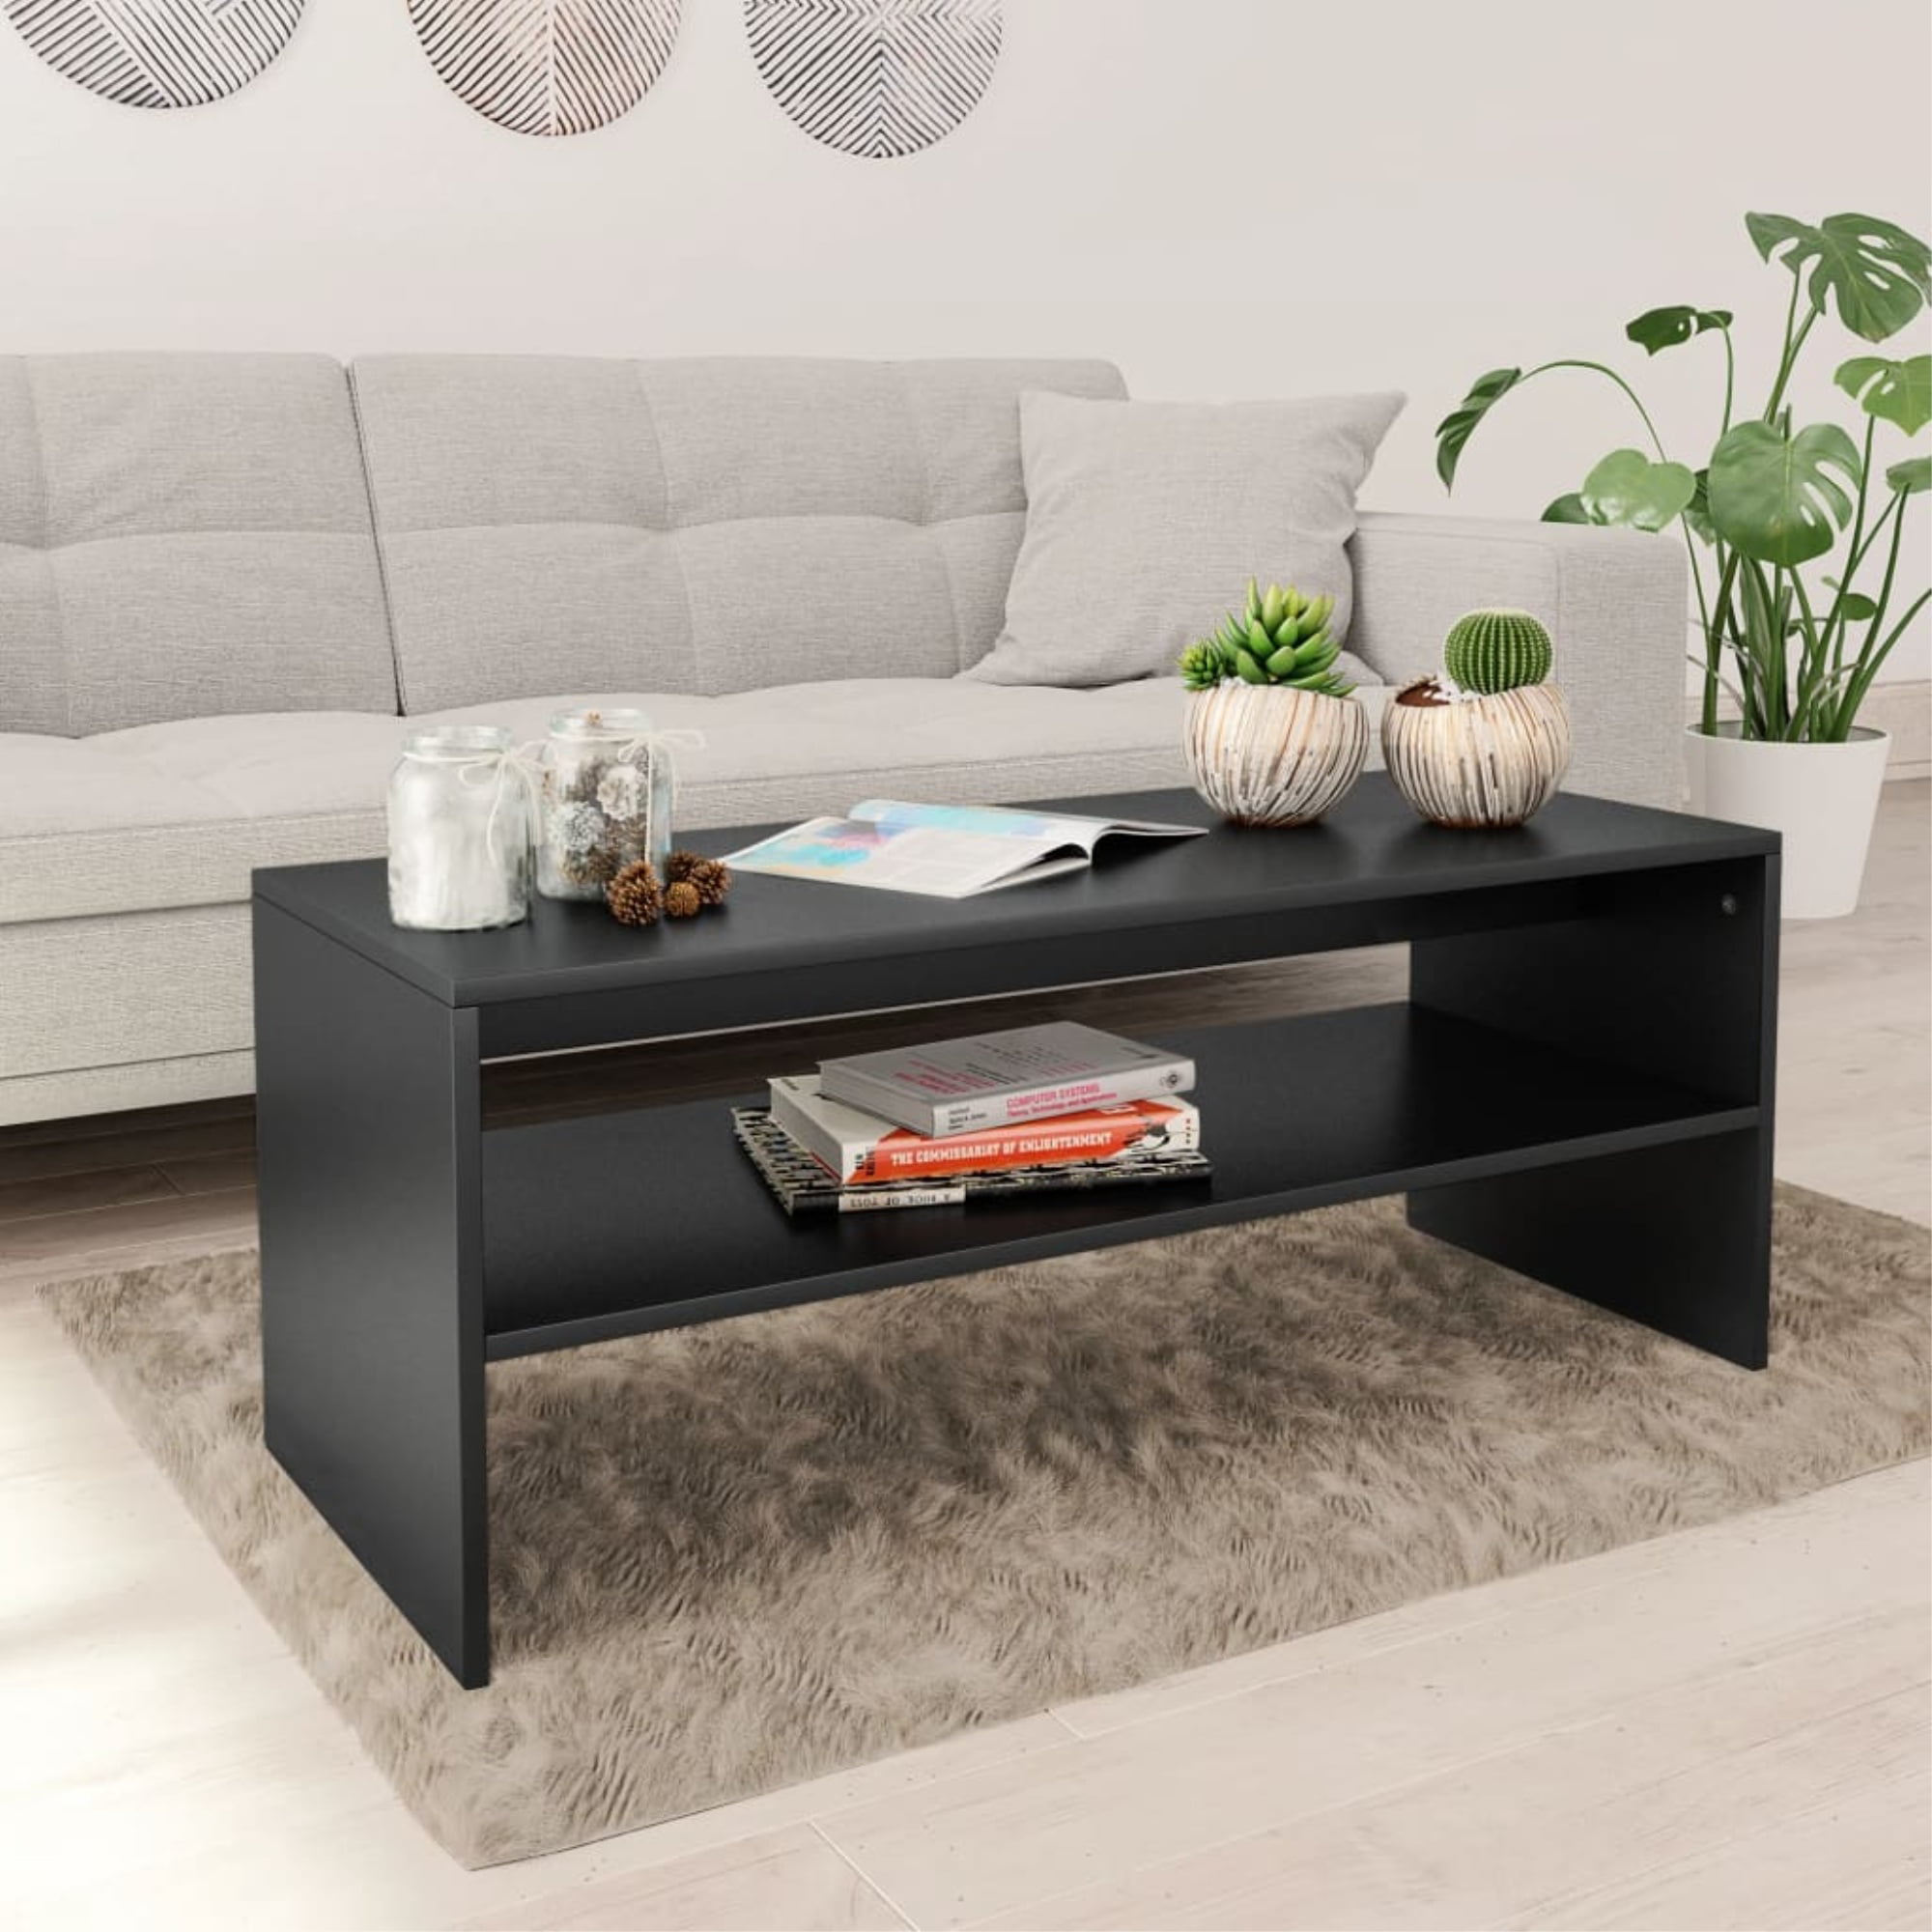 X-Design Coffee Table with Storage Shelf Home Office Living Room Furniture 